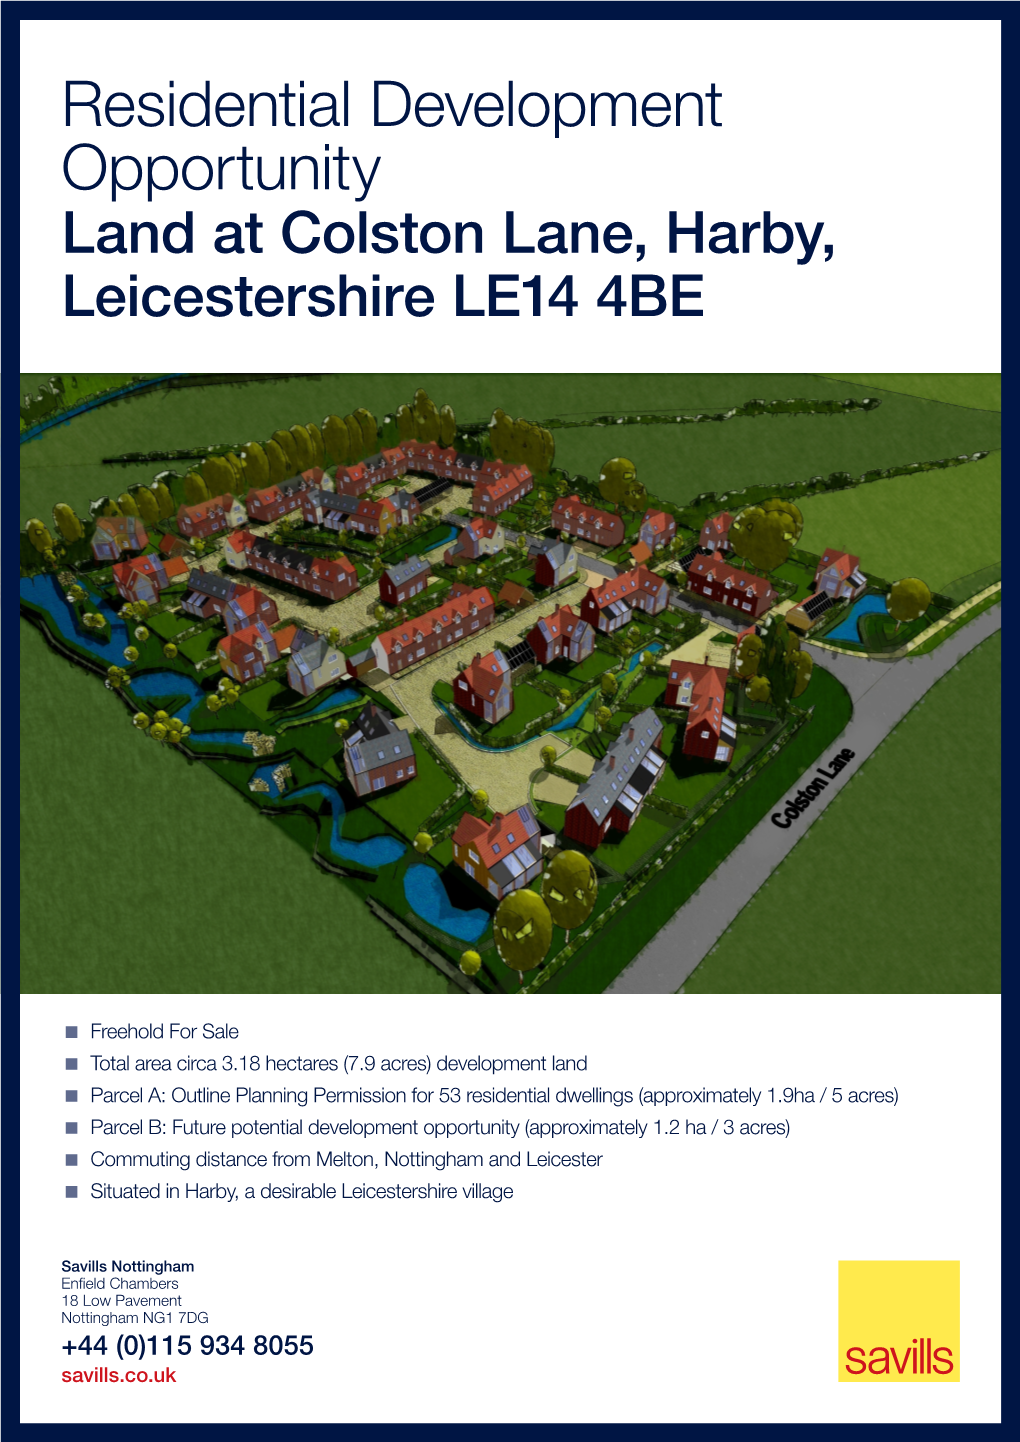 Land at Colston Lane, Harby, Leicestershire LE14 4BE